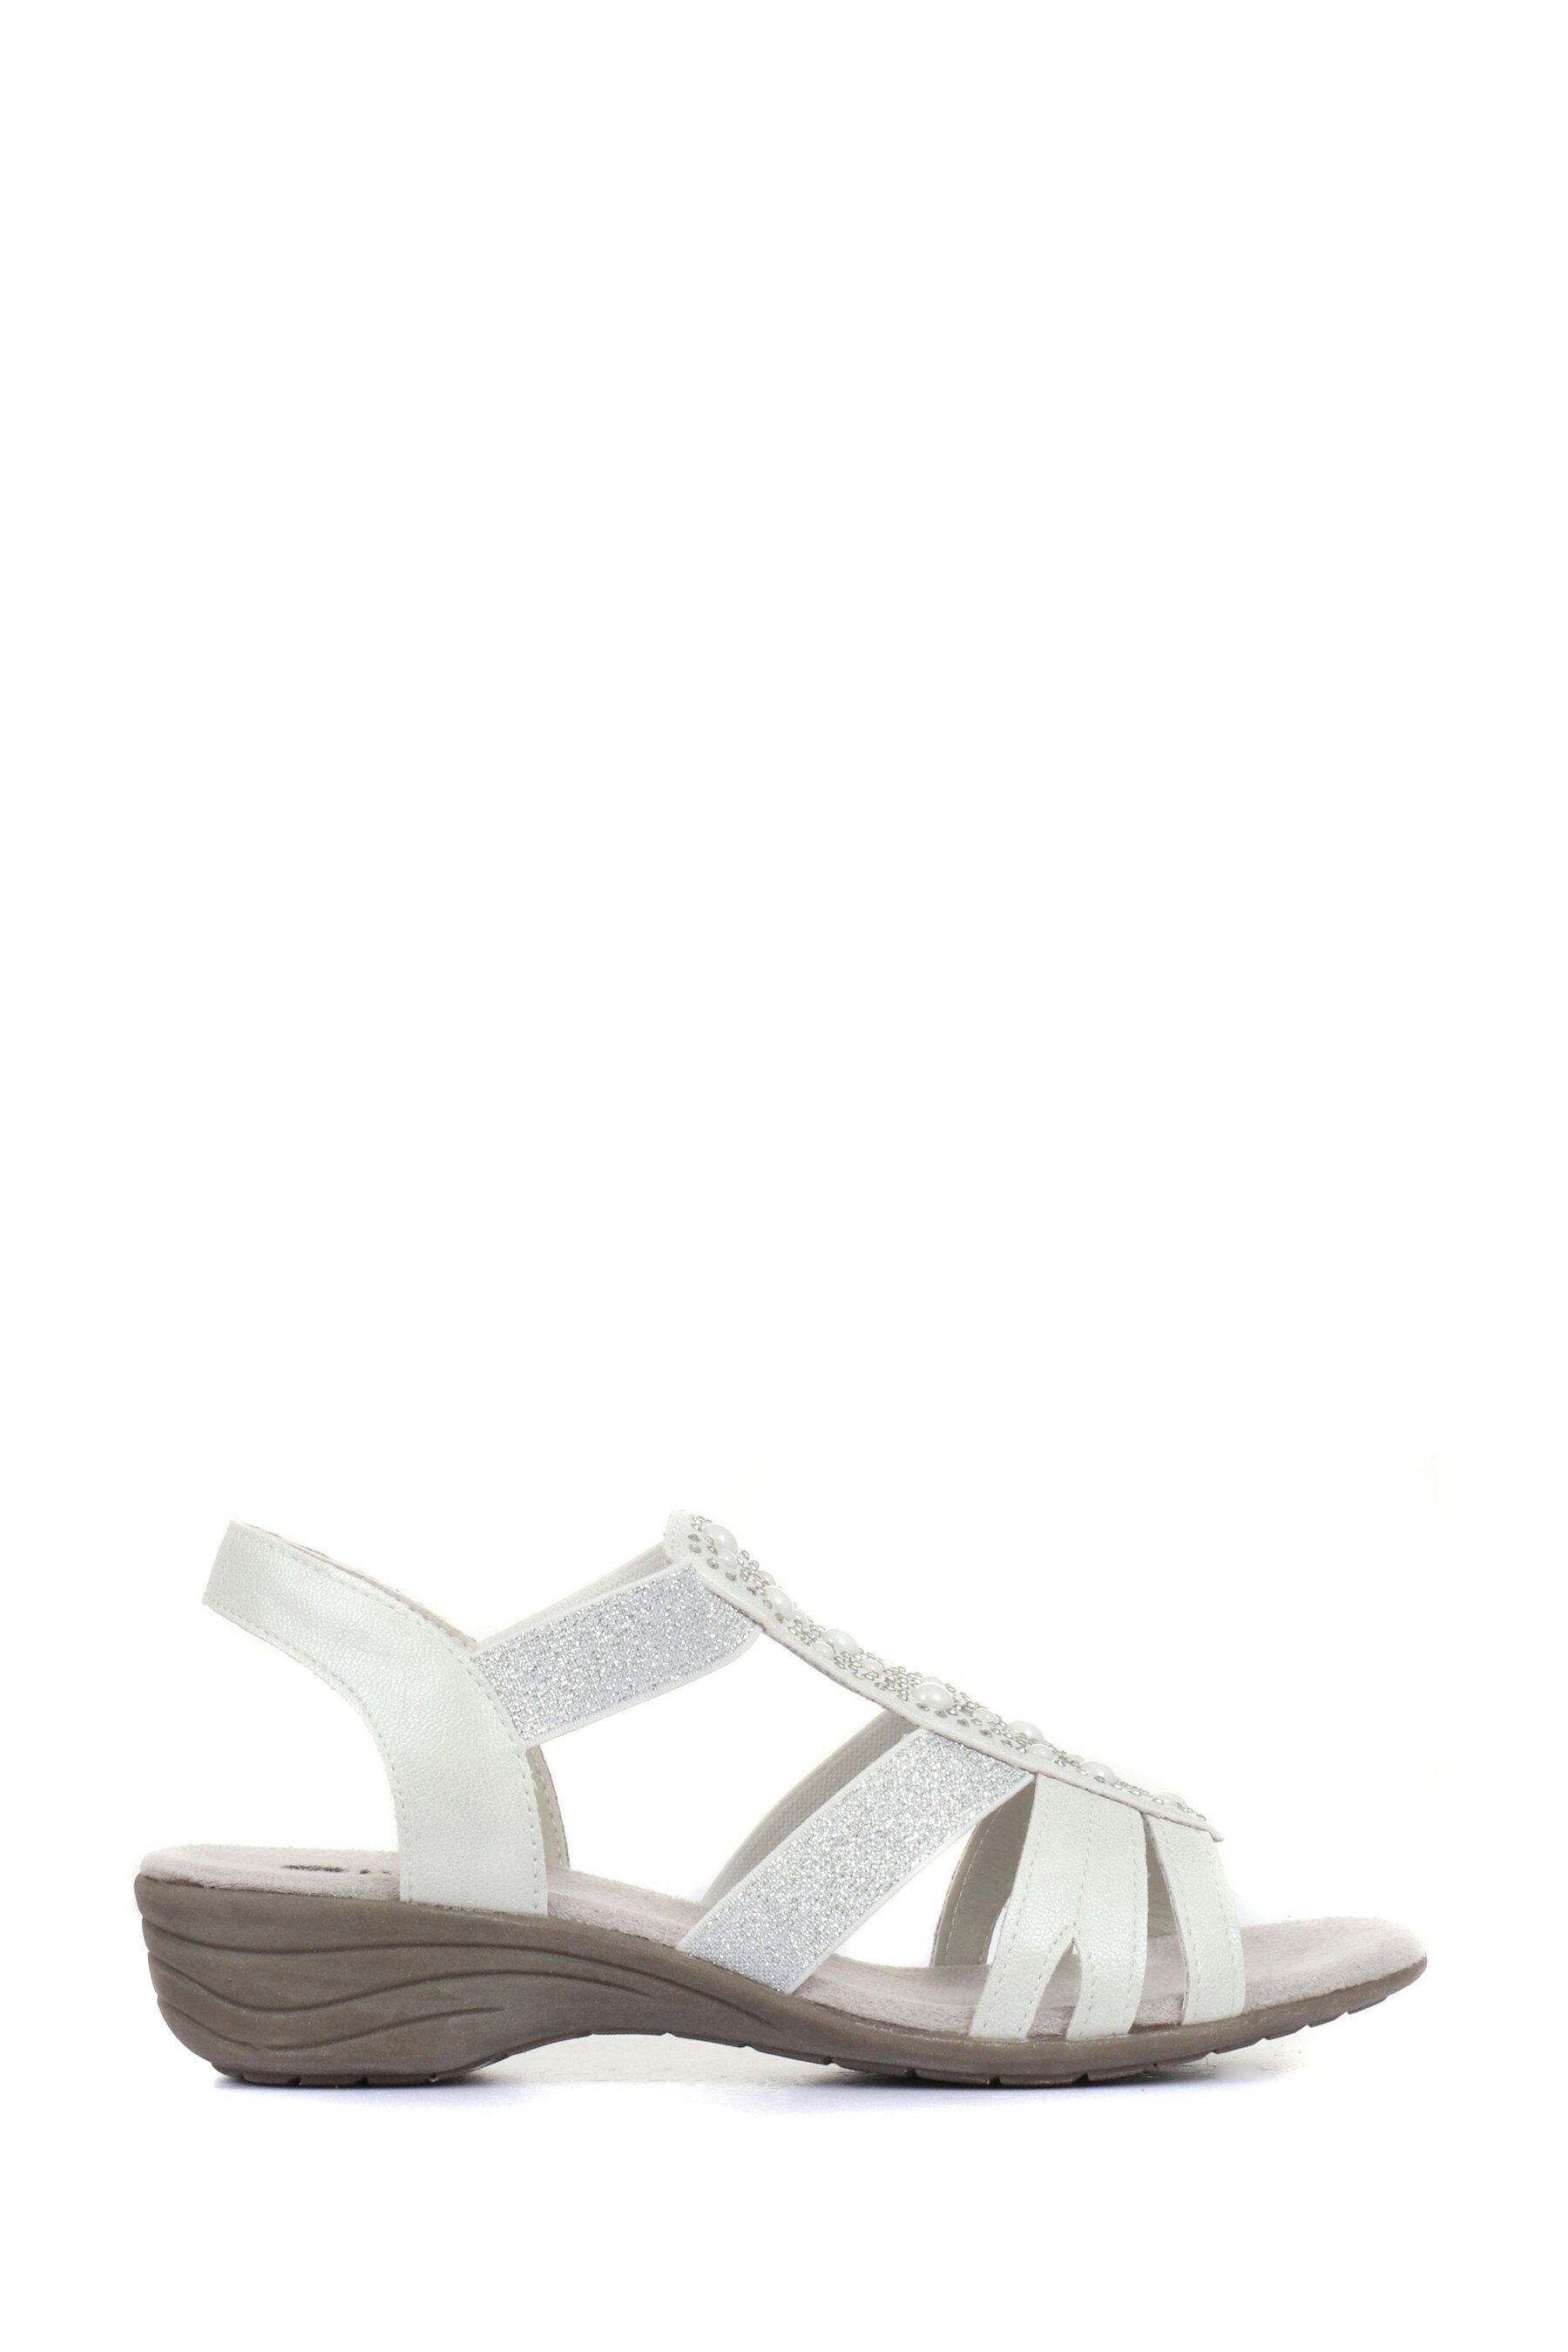 Buy Pavers White Silver Ladies Embellished Slingback Sandals From The